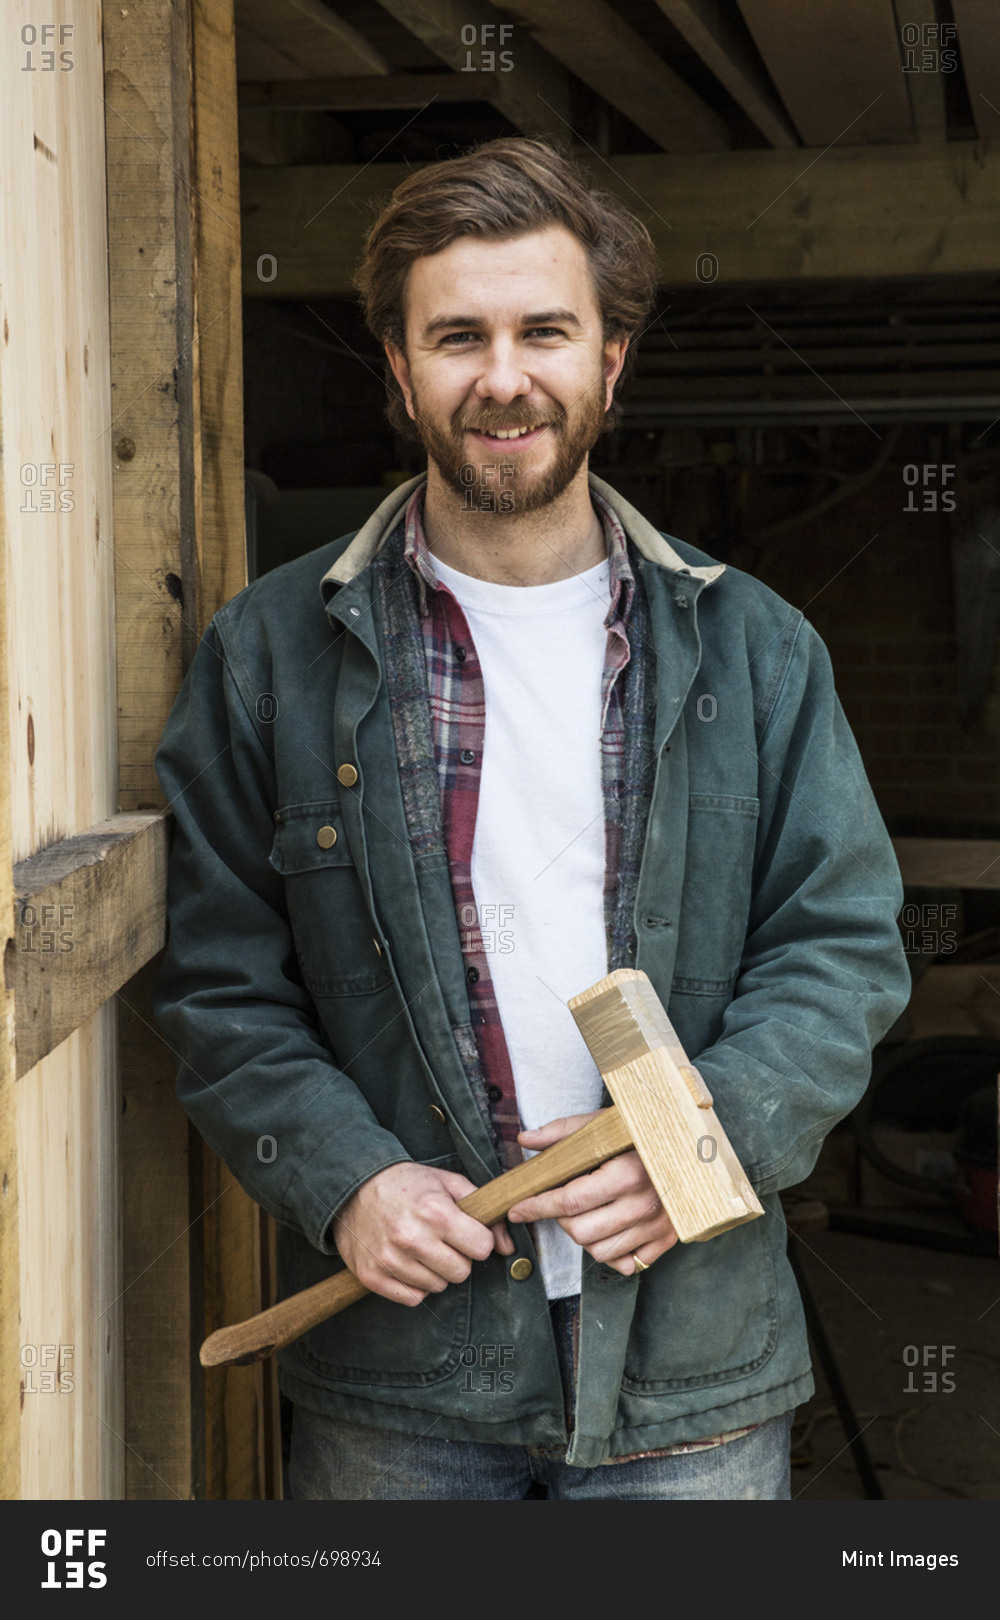 Bearded man standing in doorway of woodworking workshop, holding wooden mallet, smiling at camera